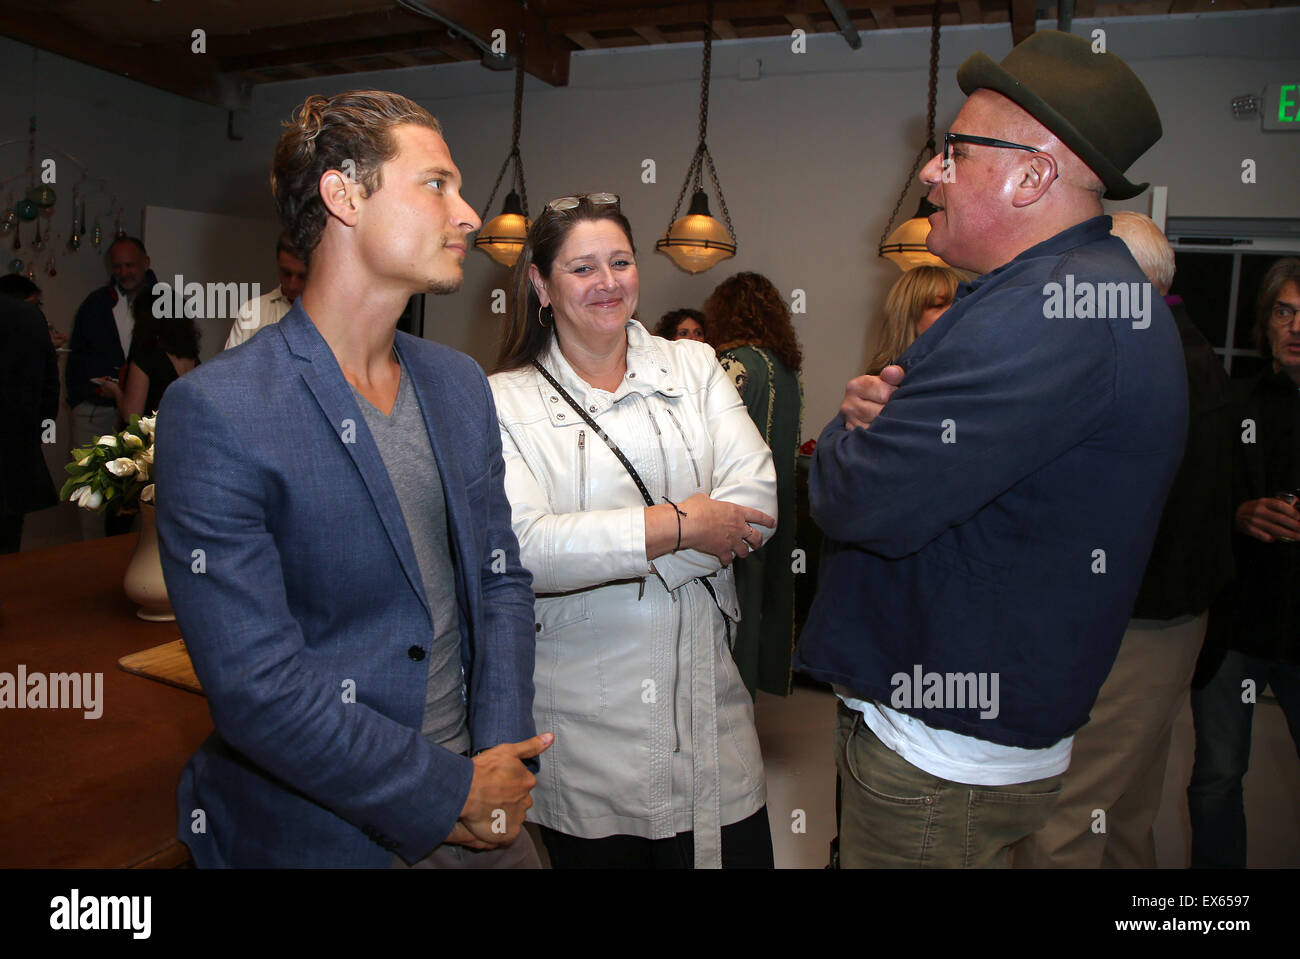 Ray Azoulay, John Carrabino and CAA Celebrates Maria Bello's new book, 'Whatever...Love is Love' at Obsolete  Featuring: Elijah Allan-Blitz, Camryn Manheim, Ray Azoulay Where: Culver City, California, United States When: 06 May 2015 C Stock Photo